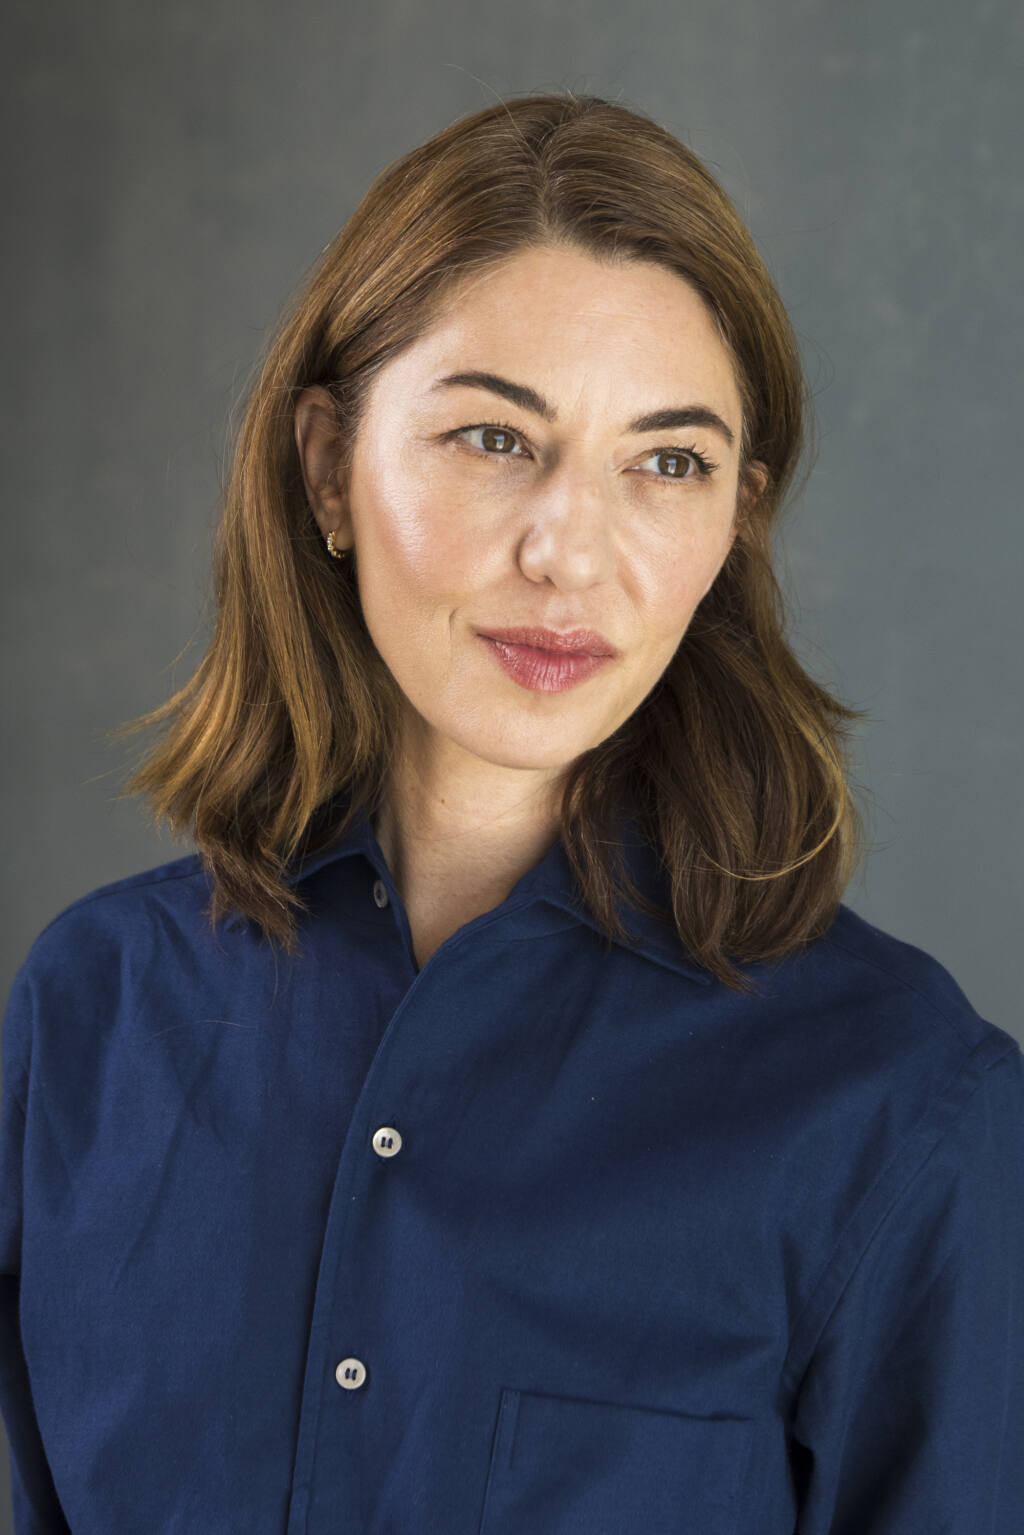 Sofia Coppola: Archive Book Signing and Conversation